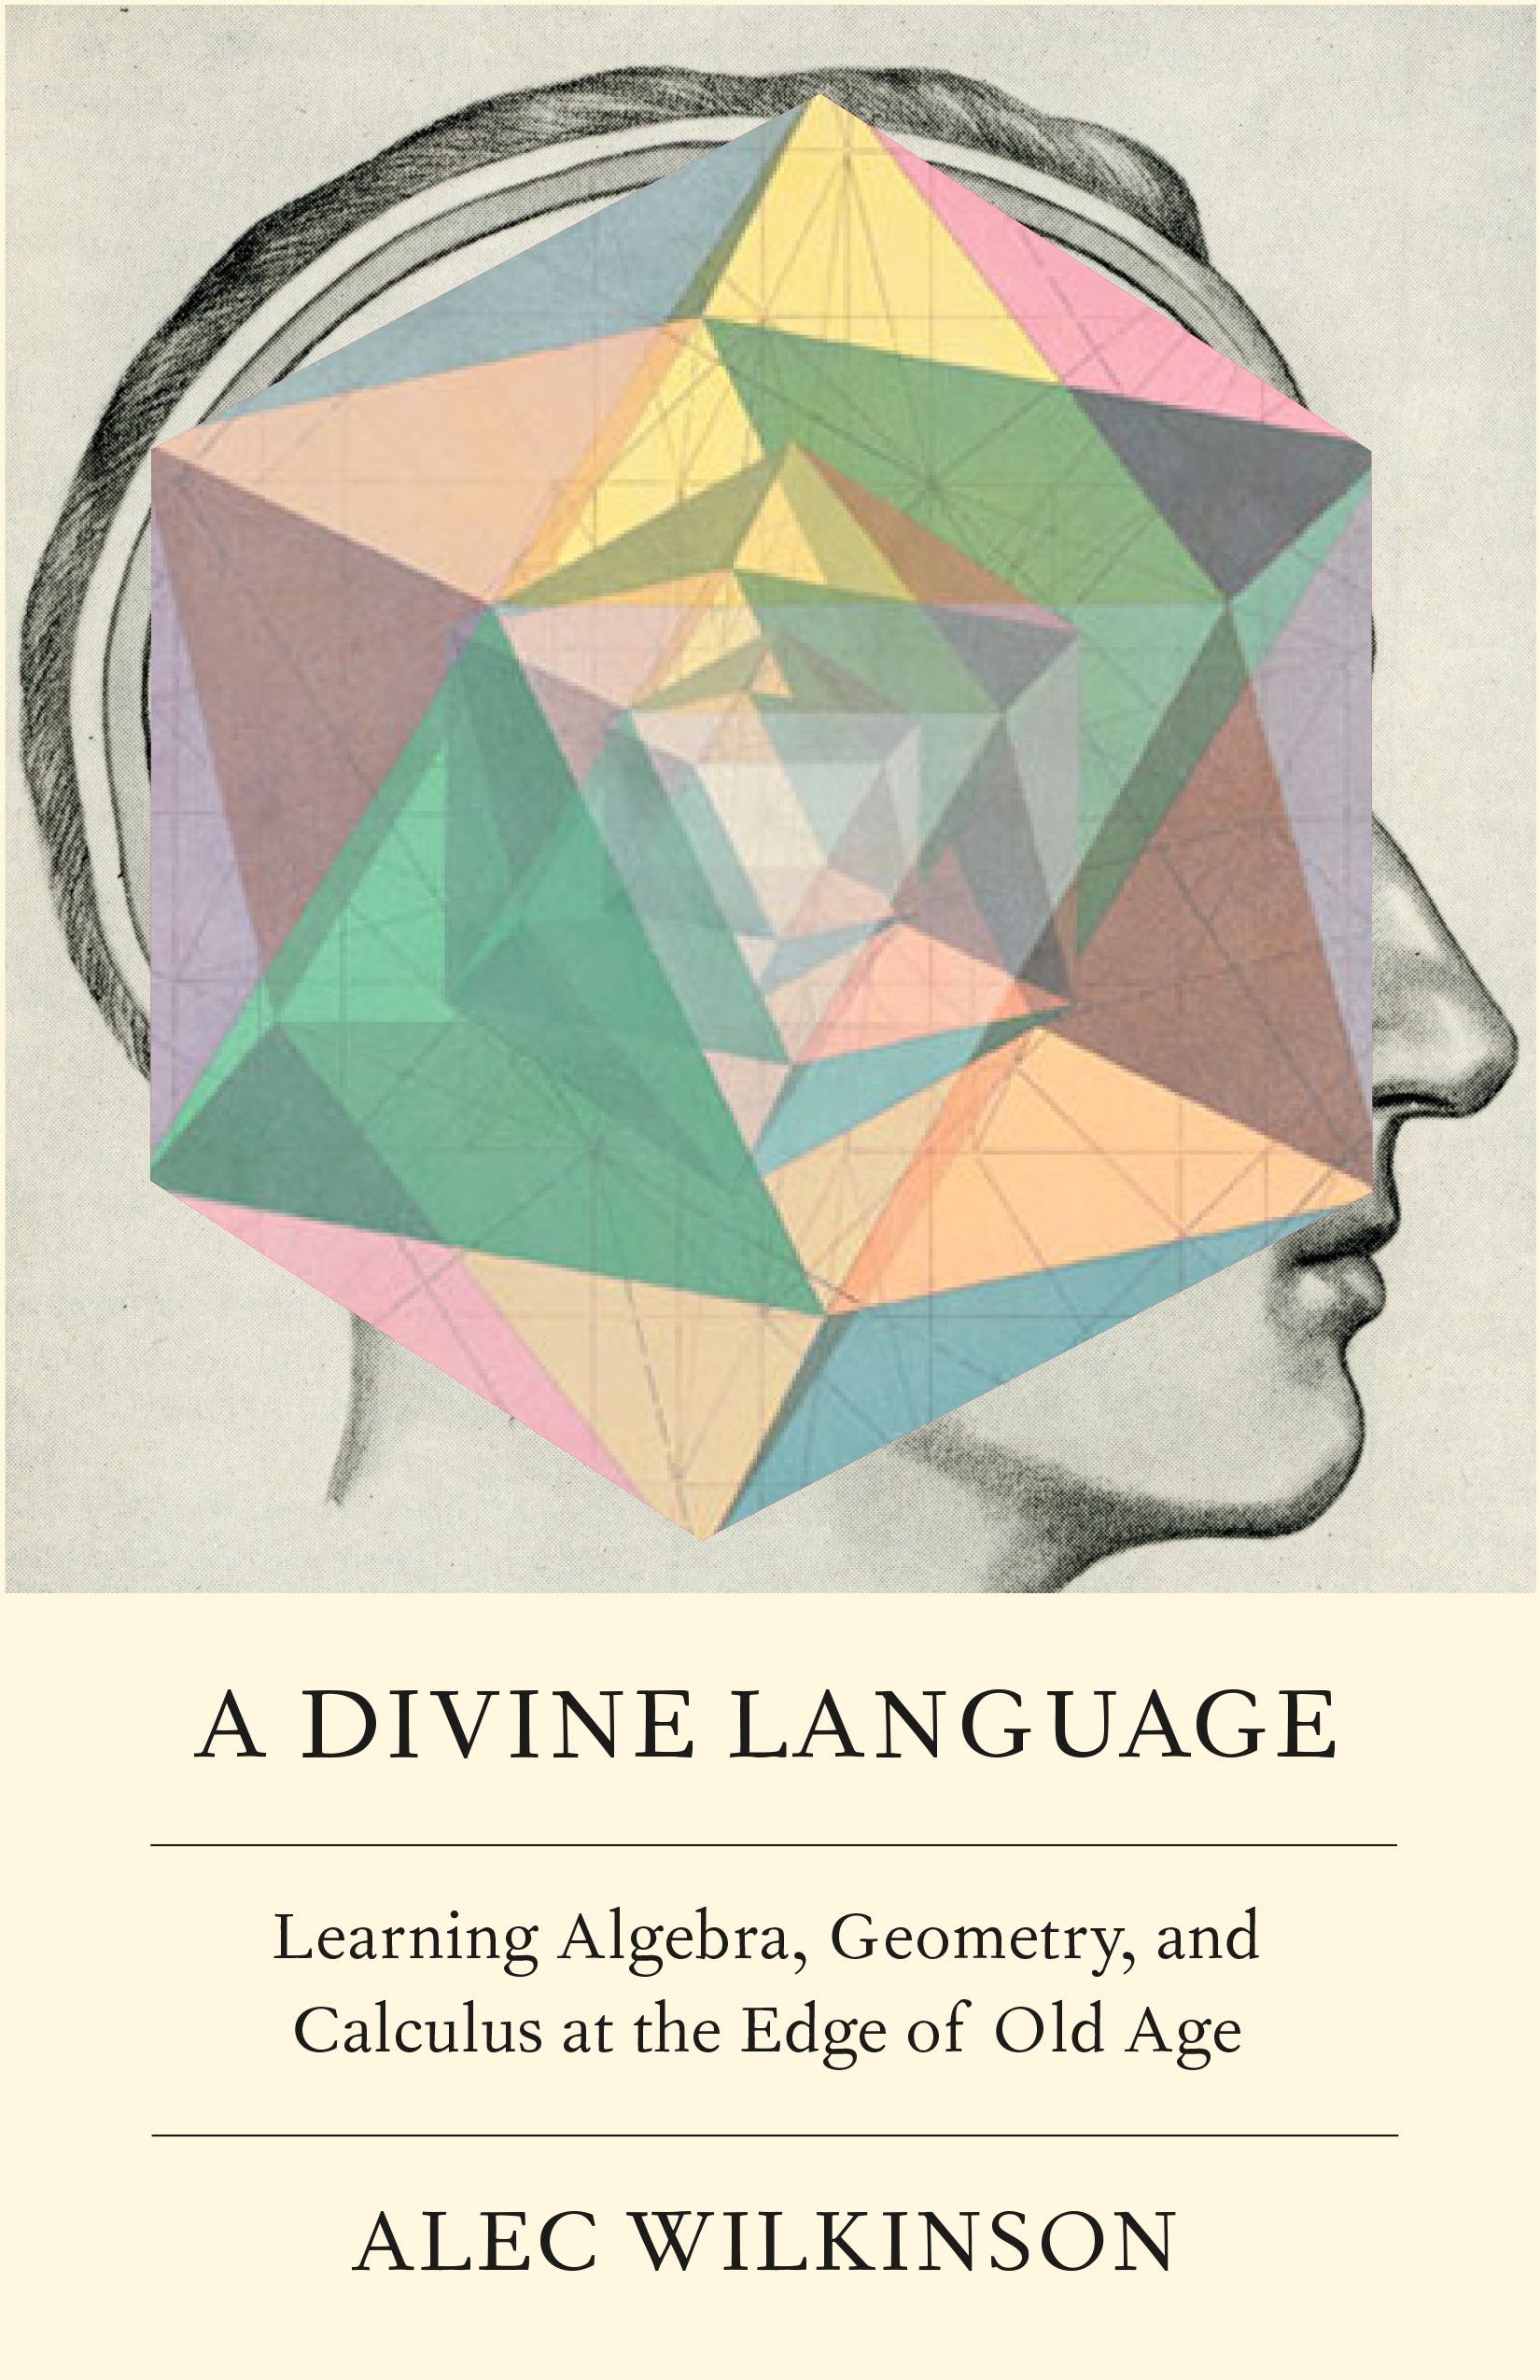 A Divine Language: Learning Algebra, Geometry, and Calculus at the Edge of Old Age by Alec Wilkinson